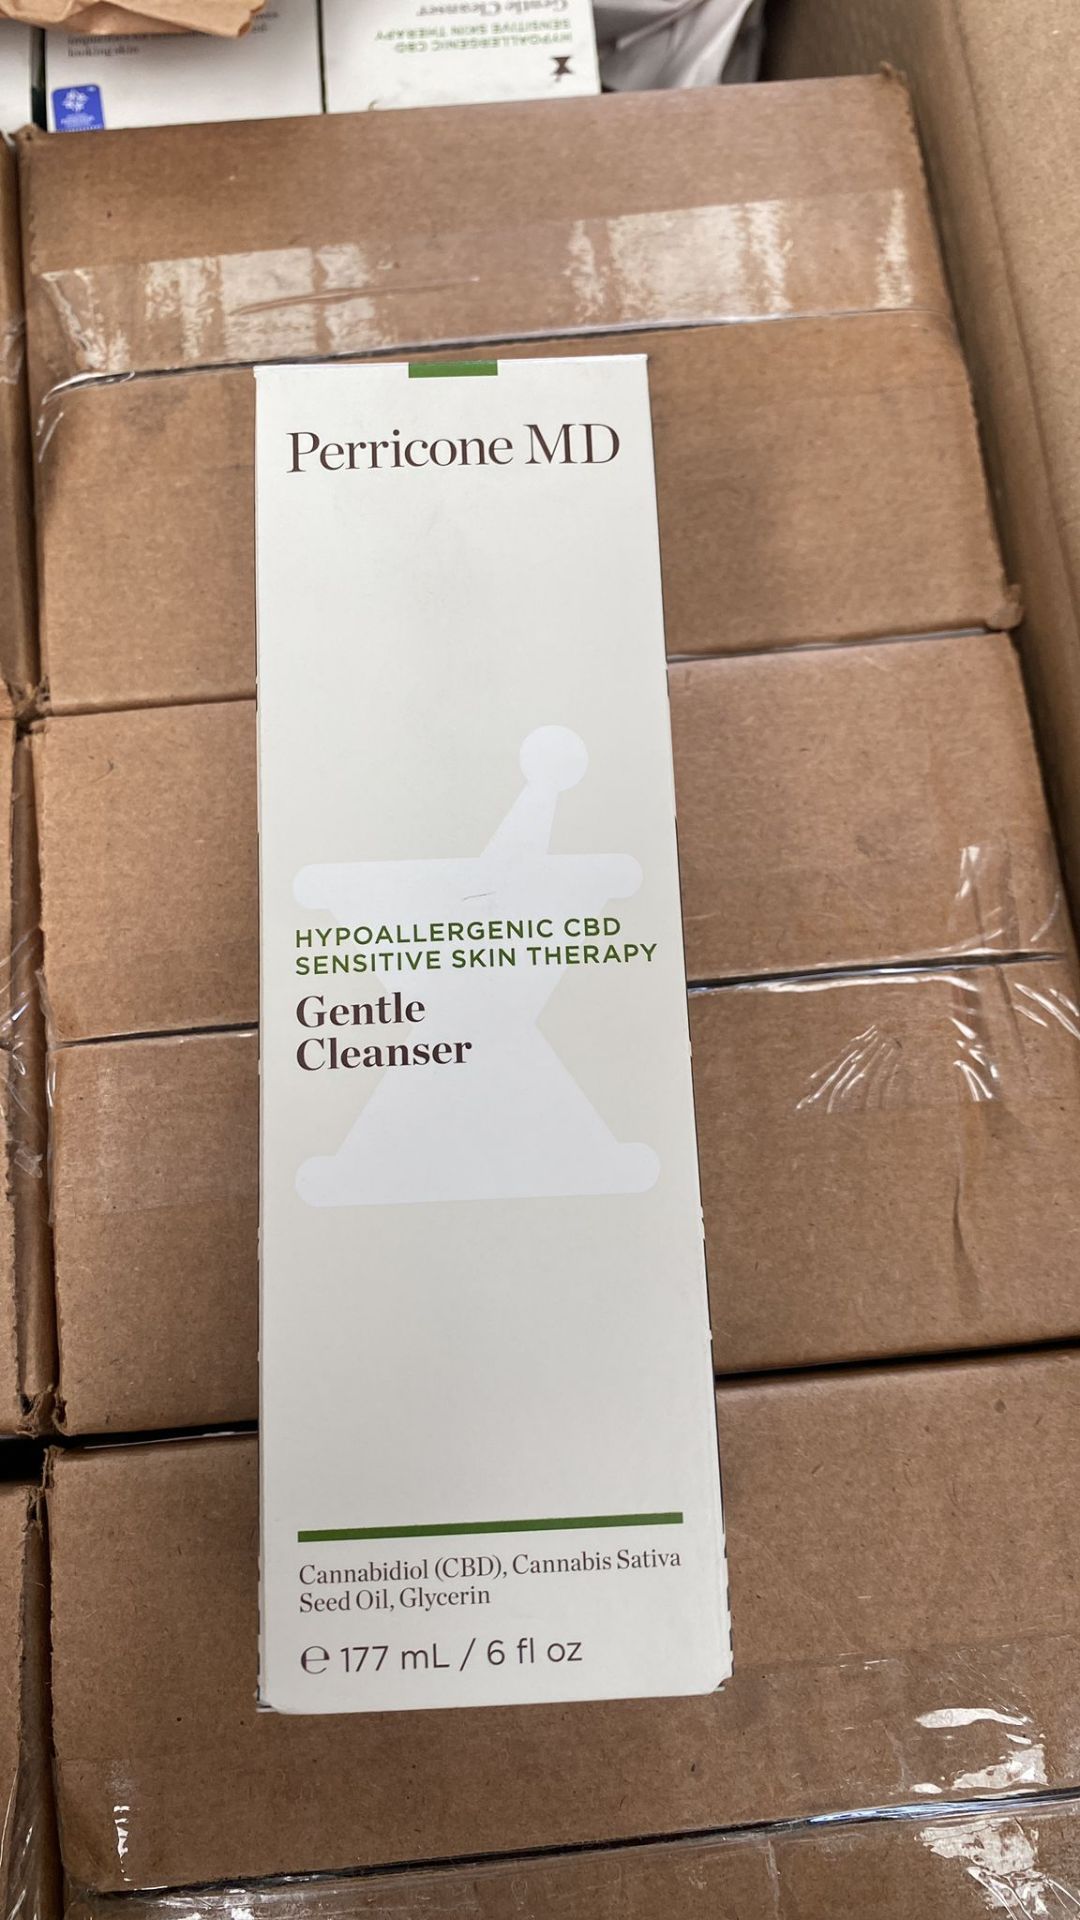 36 X PERRICONE MD HYPOALLERGENIC CBD SENSITIVE SKIN THERAPY GENTLE CLEANSER RRP £1188 - Image 3 of 3